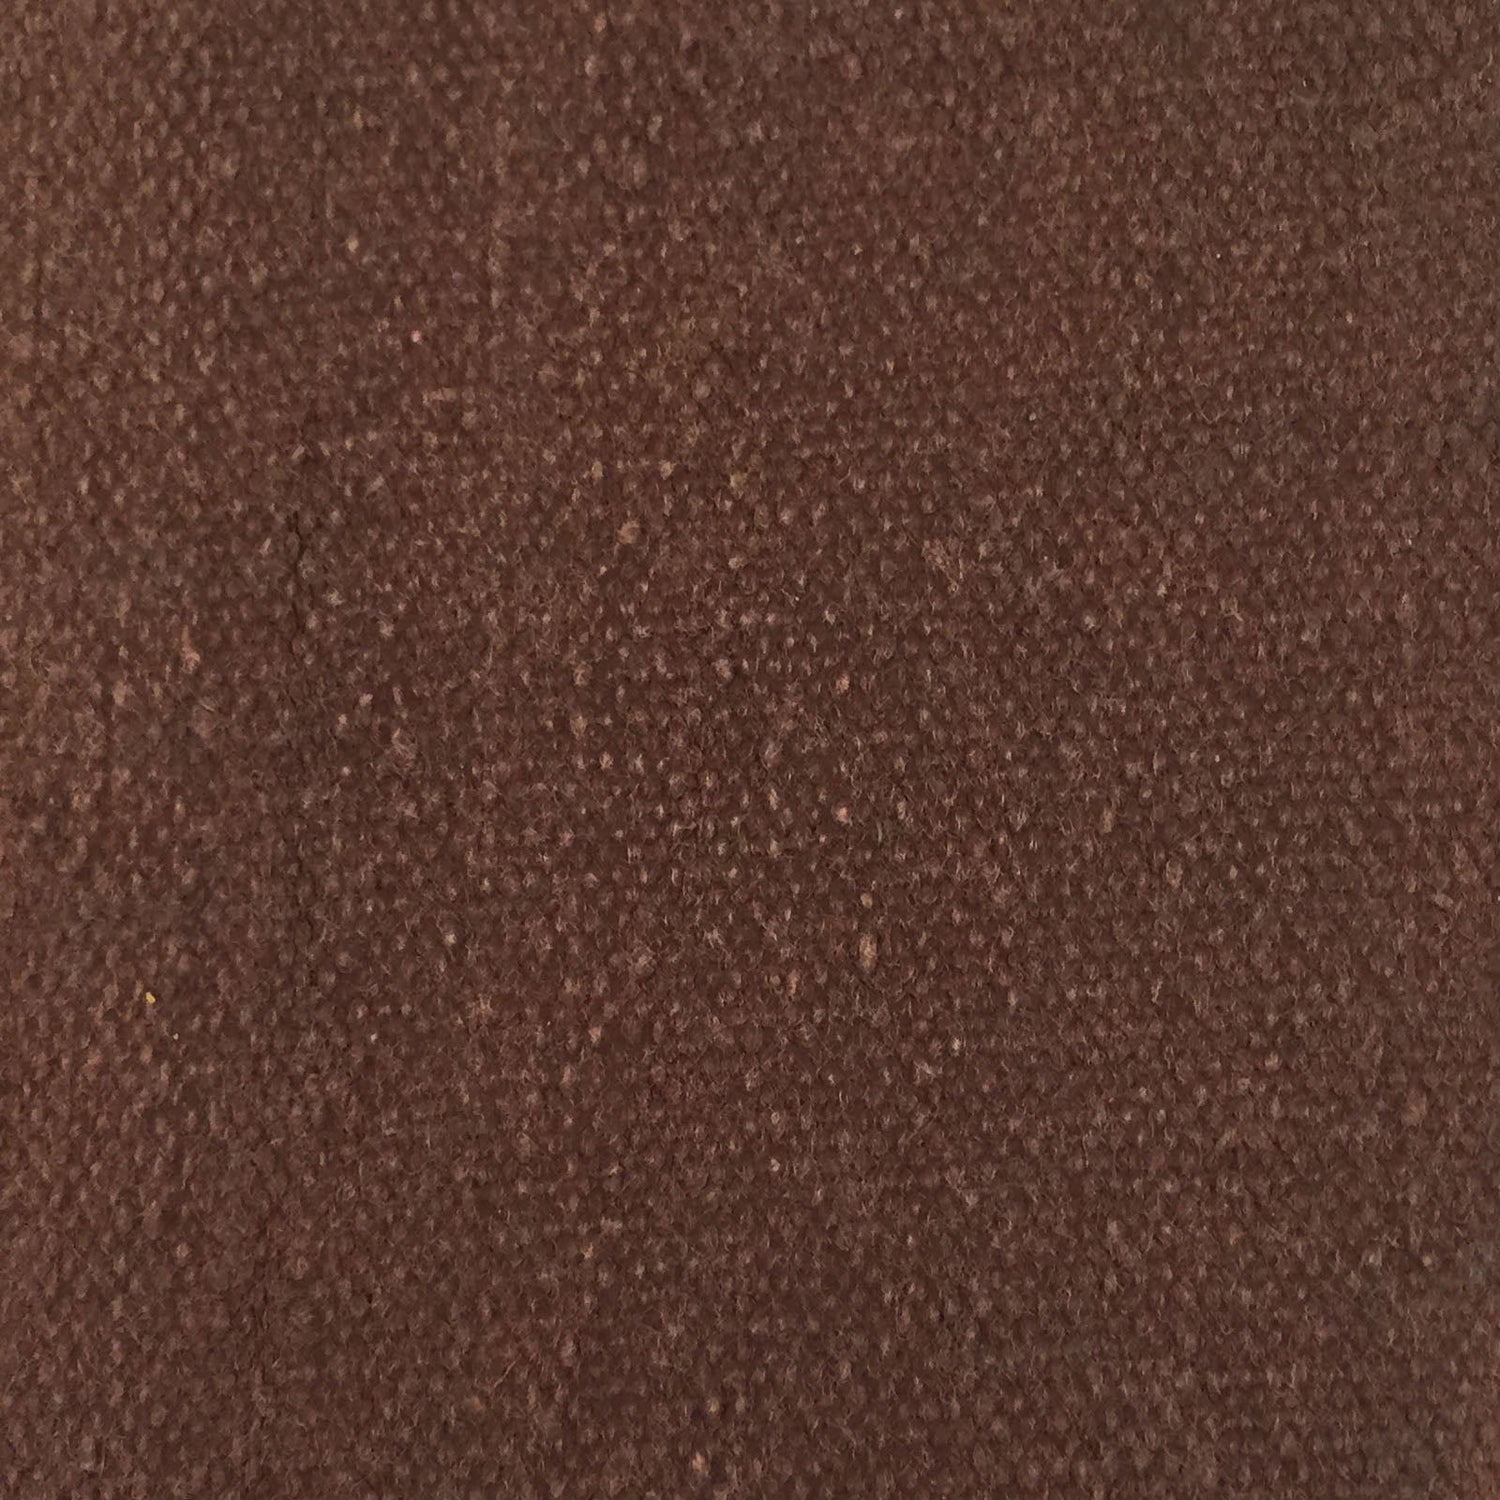 16 oz Canvas Treated Water Resistant Fabric [60" x 100 Yards]